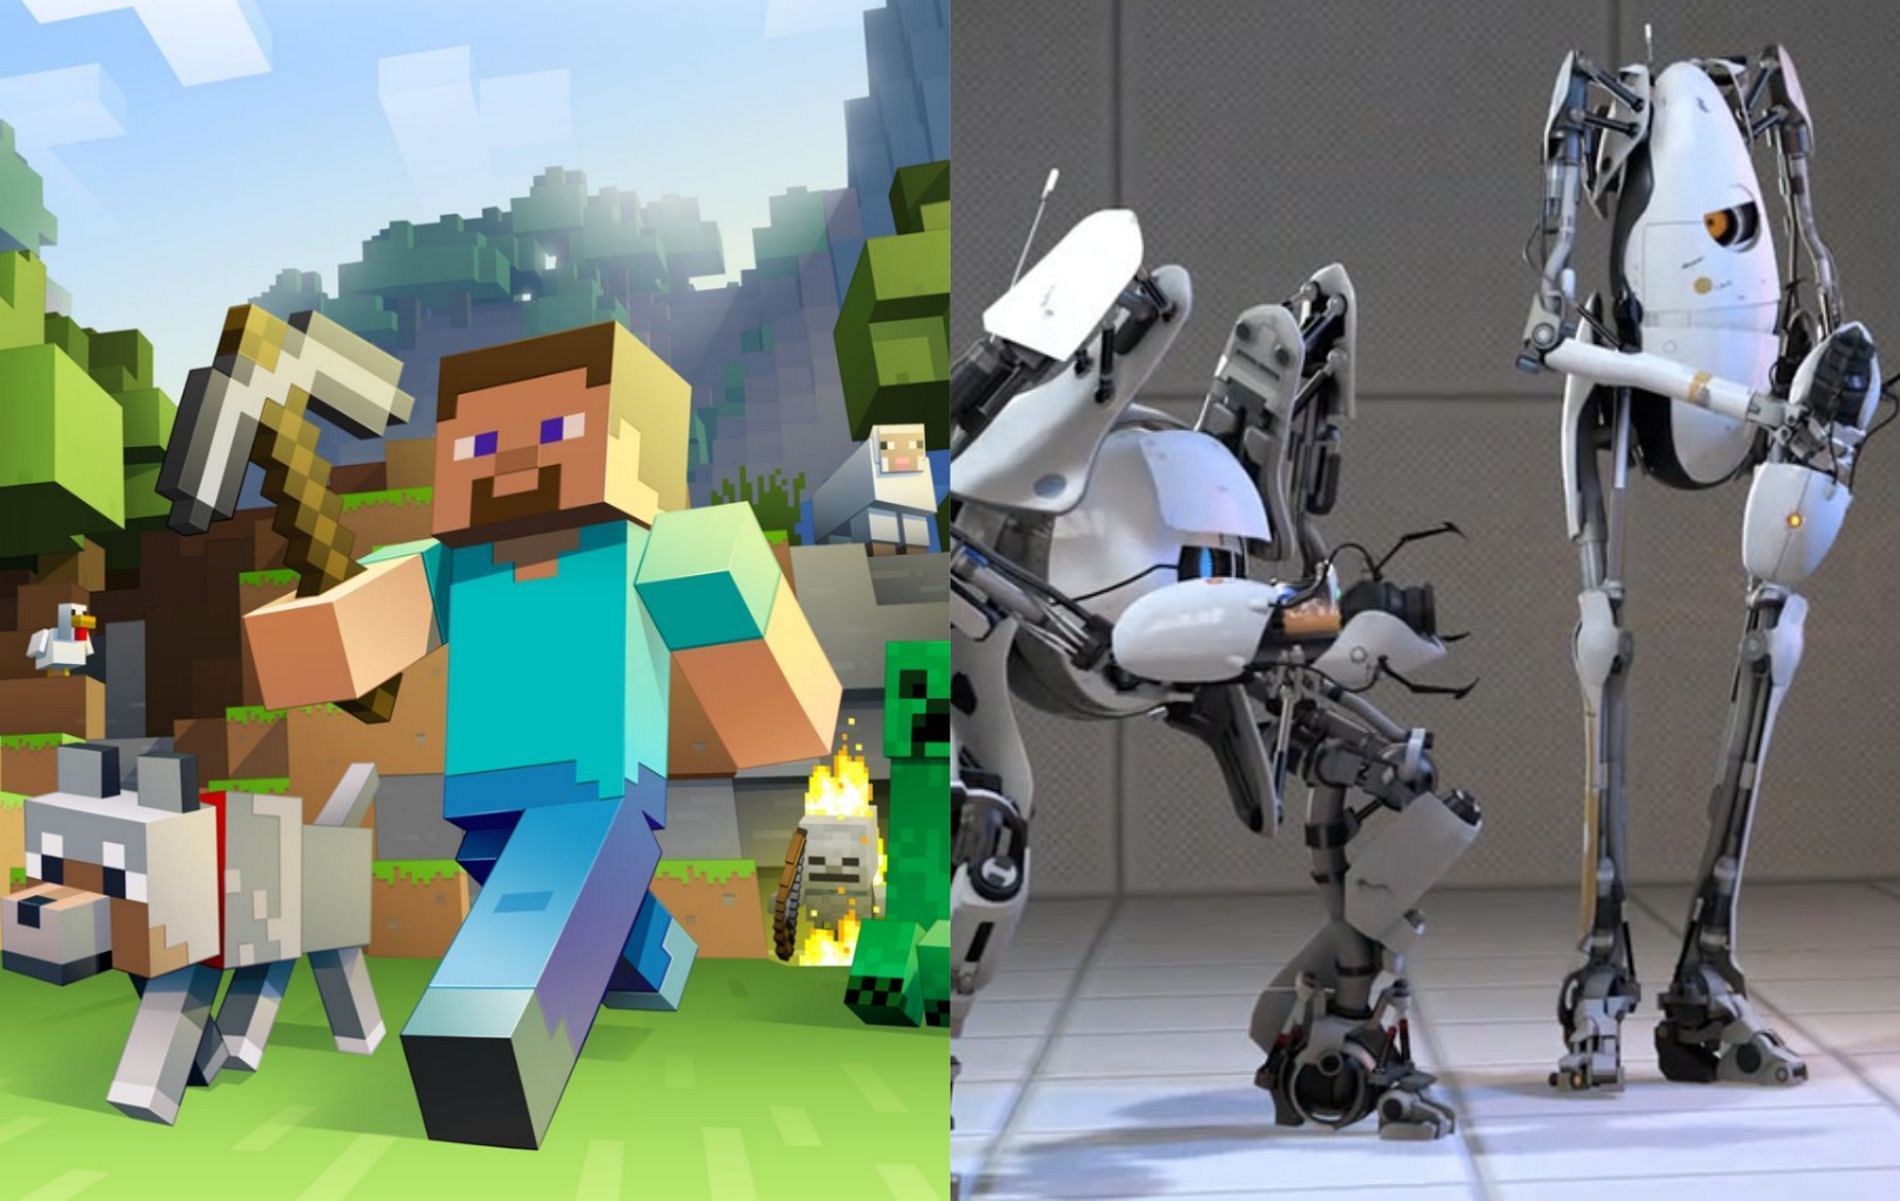 The best video games to develop cognitive skills (Images via Minecraft and Portal 2)